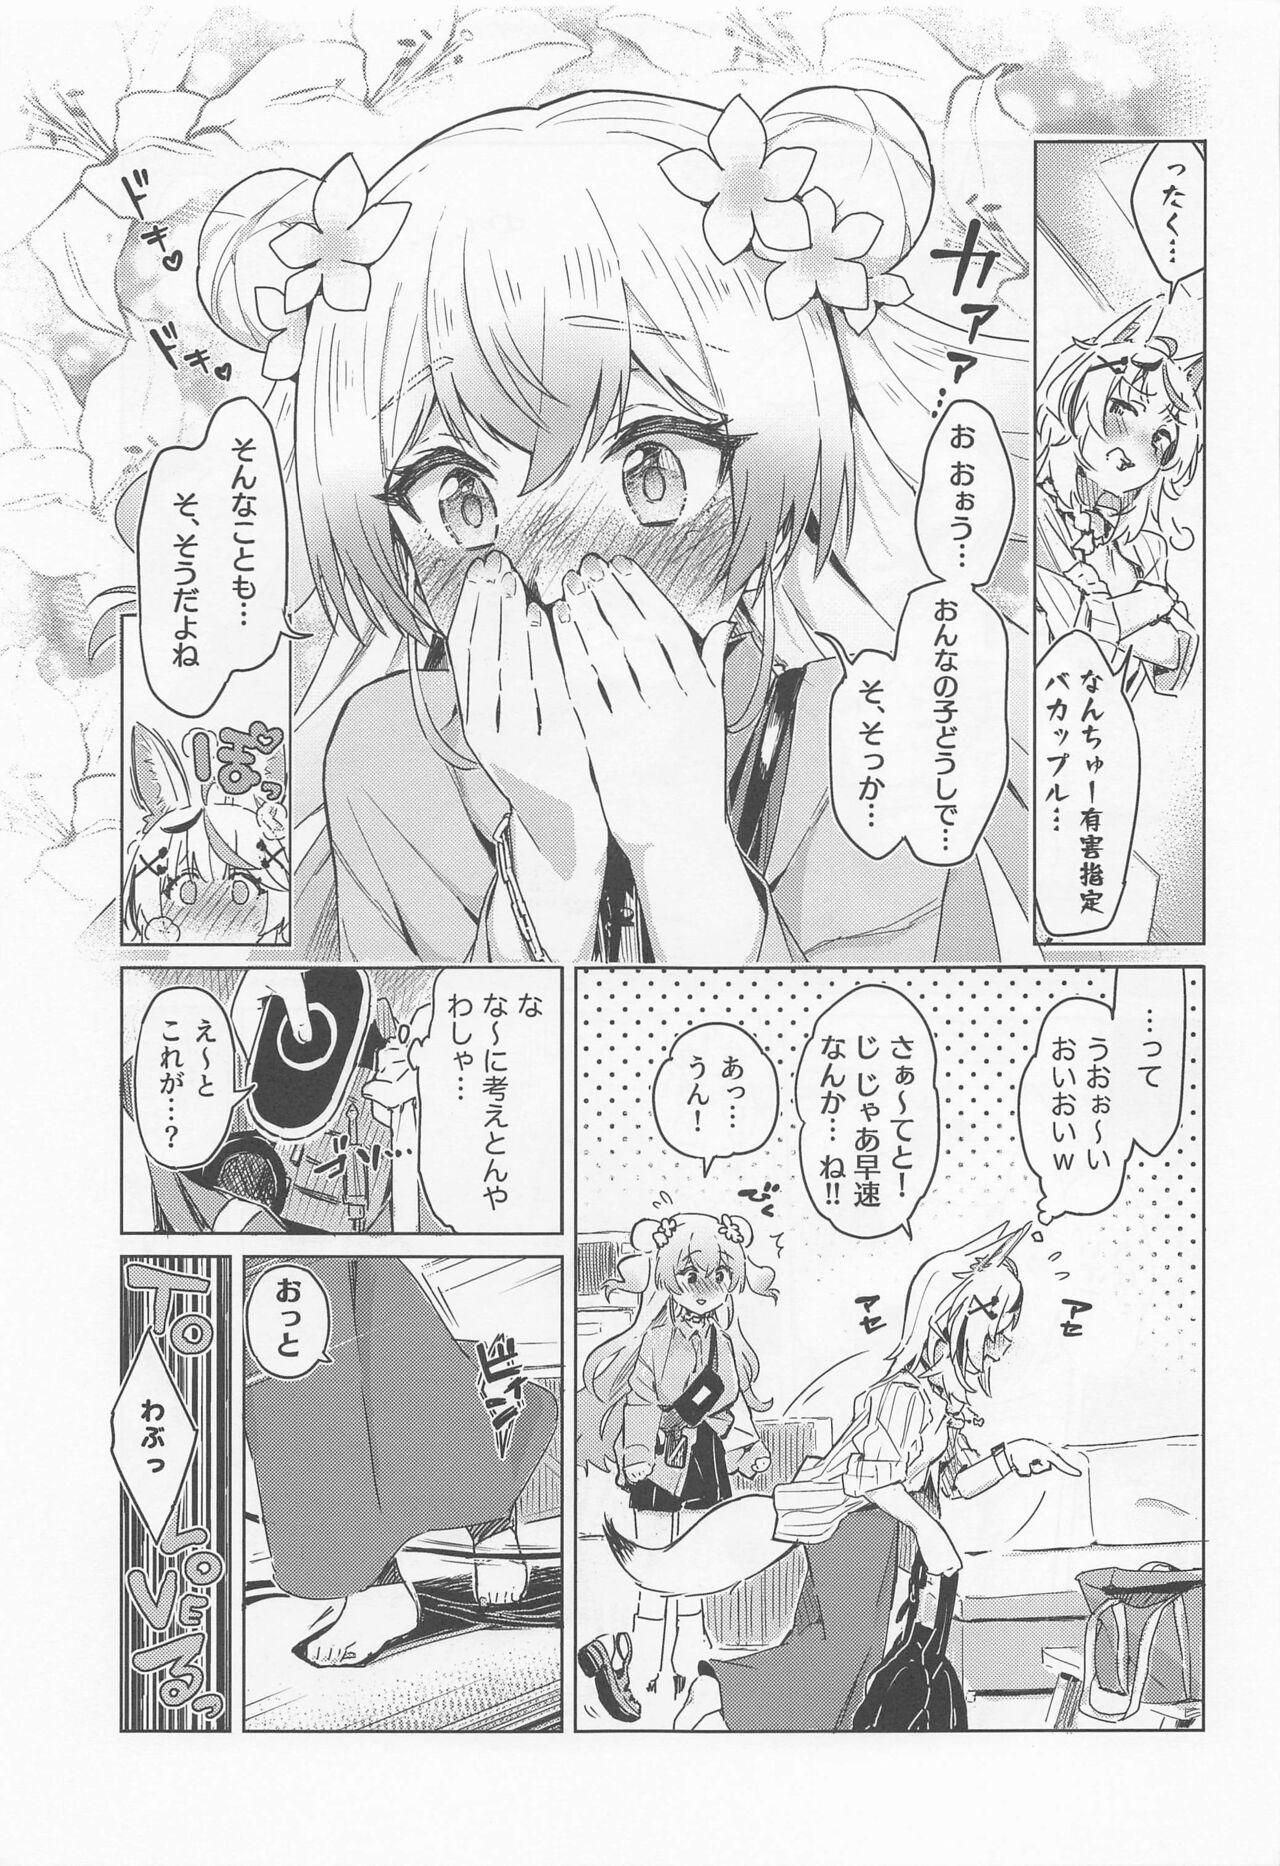 Gay Brownhair Fennec wa Iseijin no Yume o Miru ka - Does The Fennec Dream of The Lovely Visitor? - Hololive Fucking - Page 10